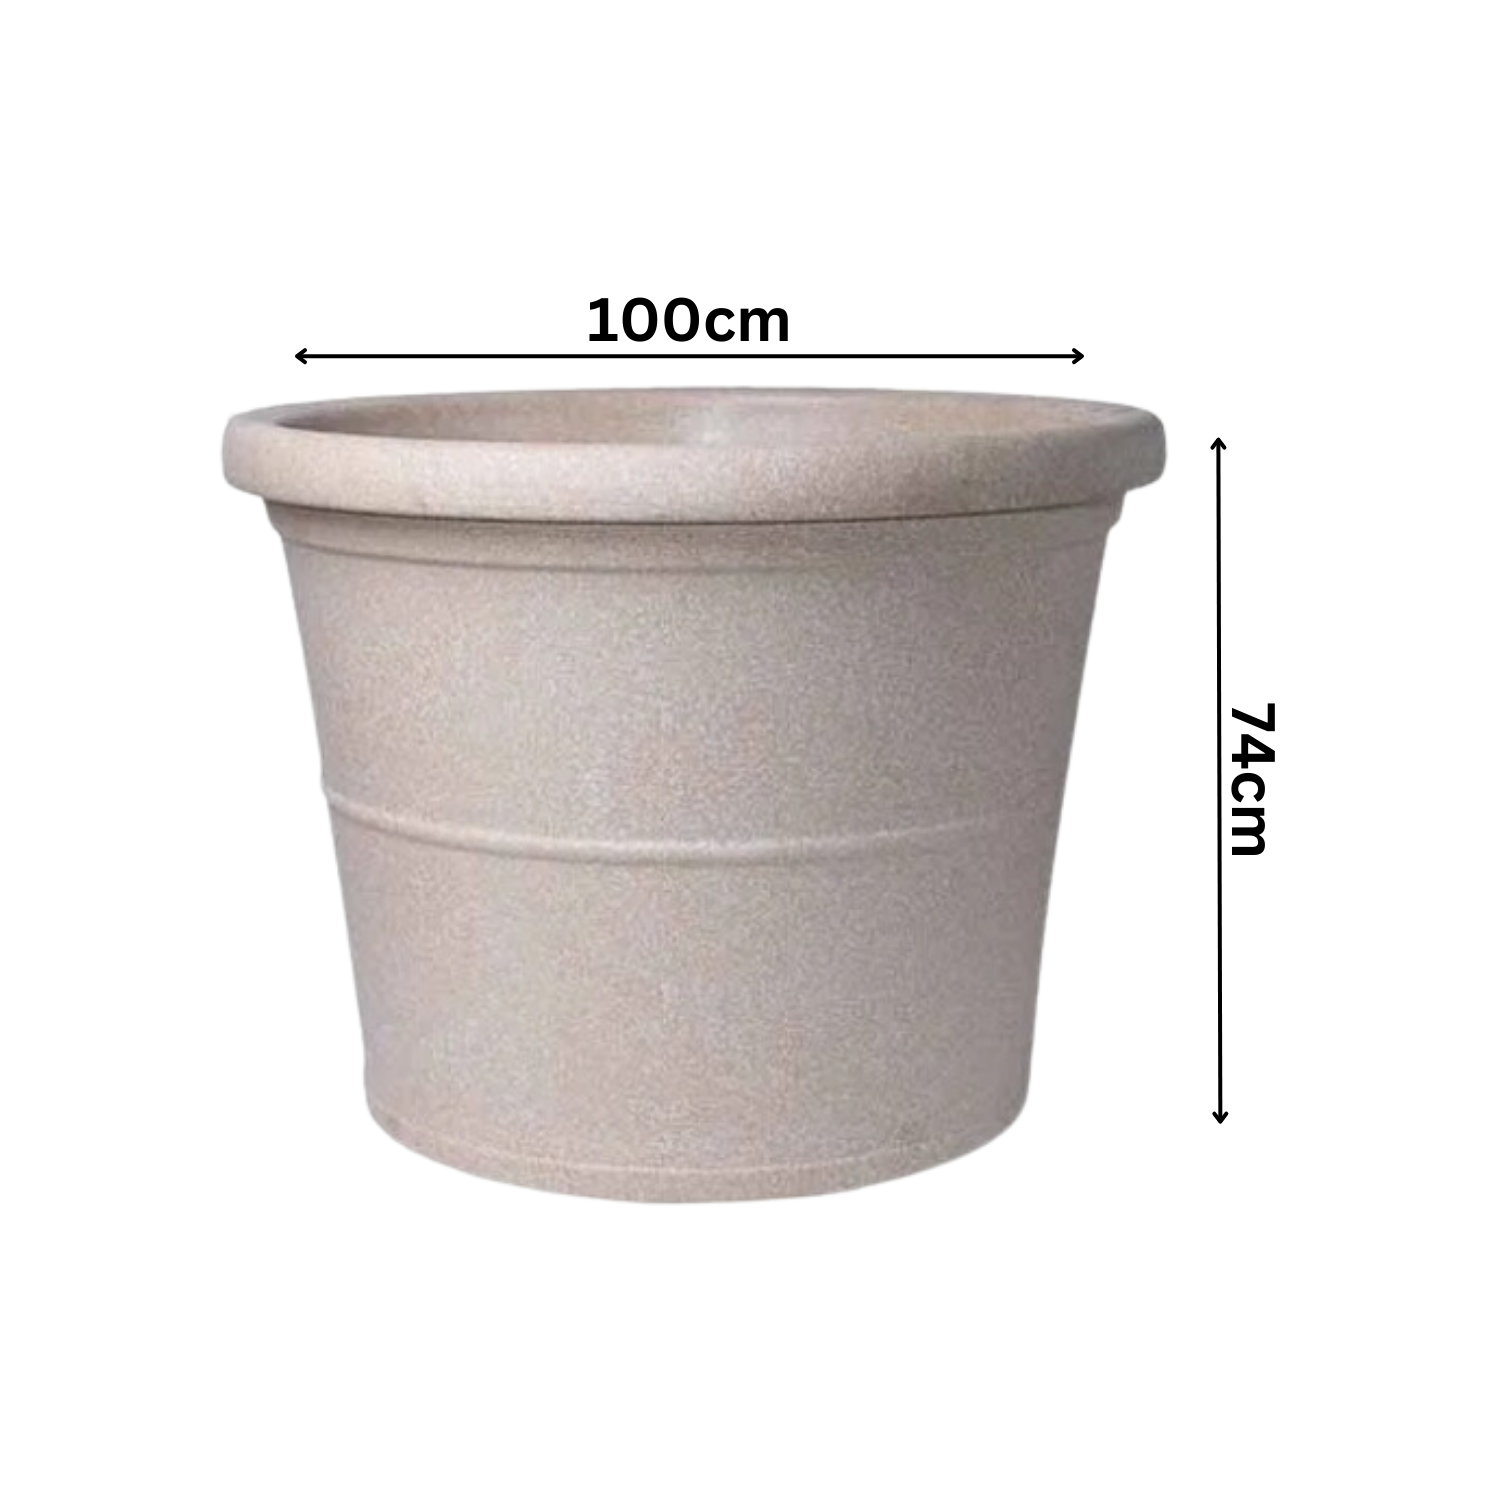 Duro Rotomolded Round Plastic Pot For Home & Garden (Cream Stone Finish, Pack Of 1)